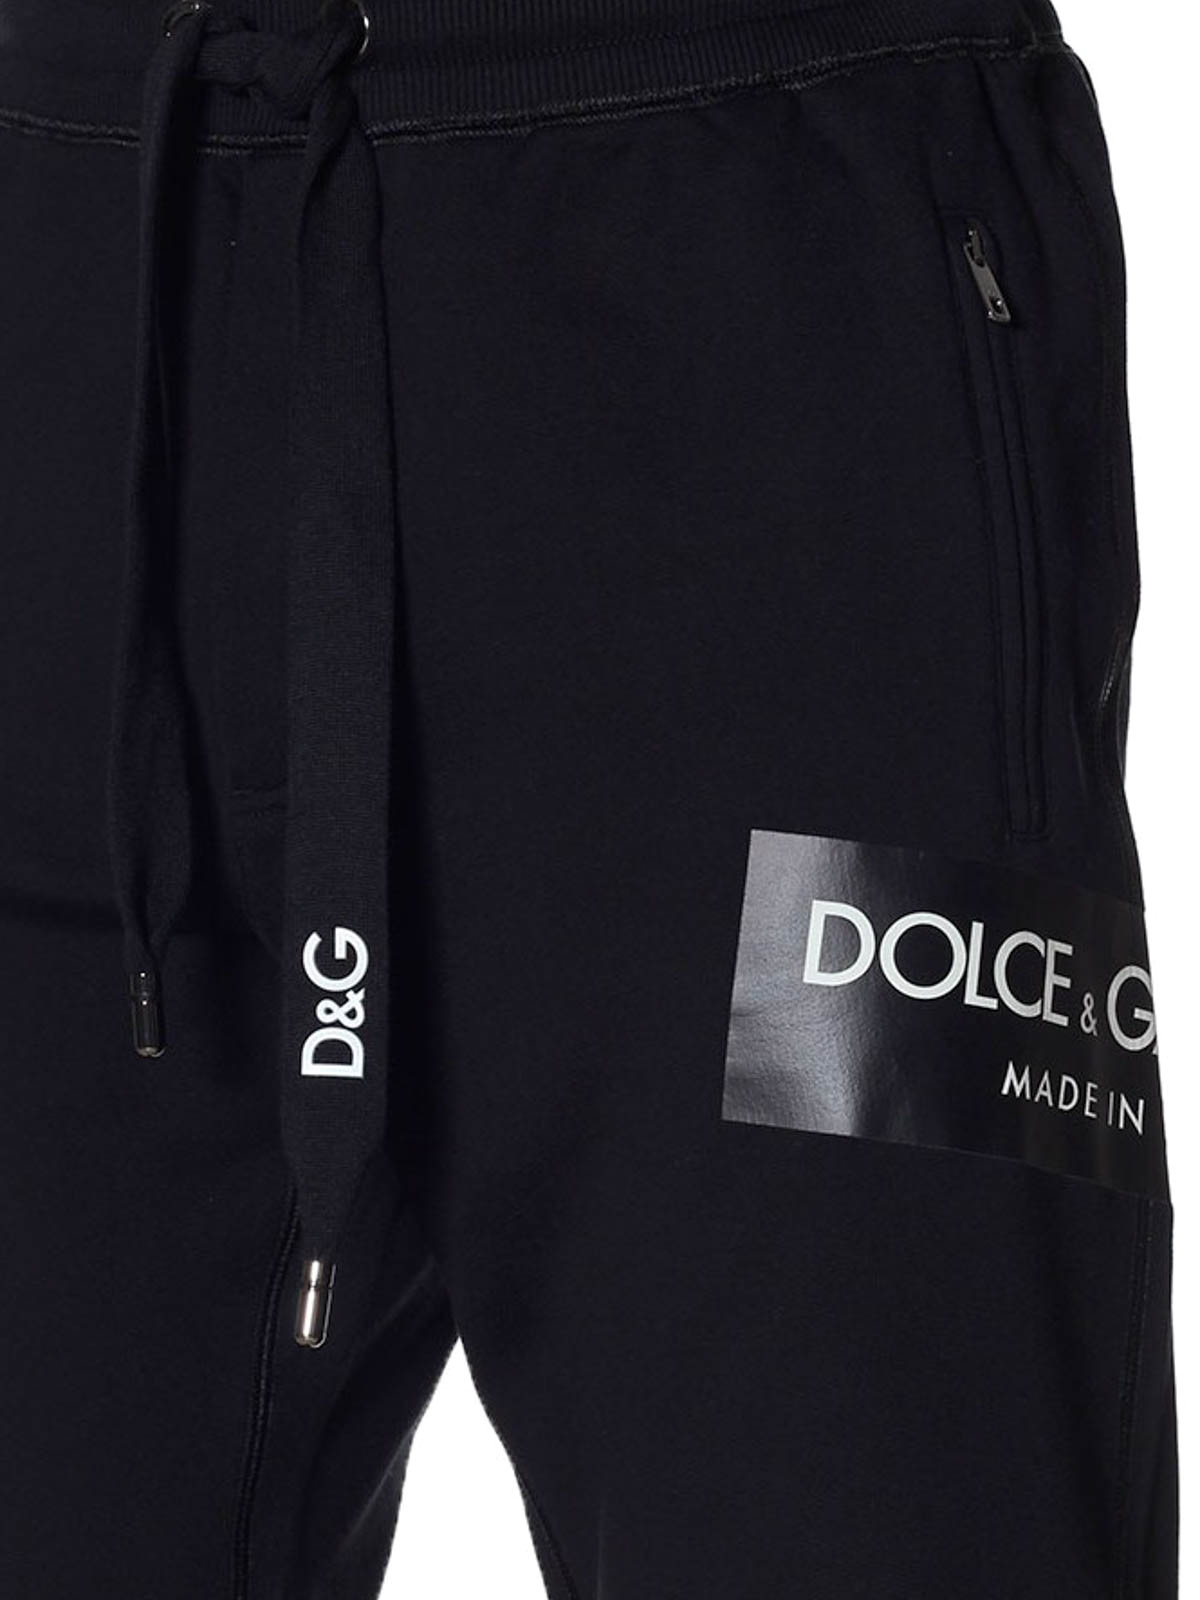 dolce and gabbana tracksuit black and white